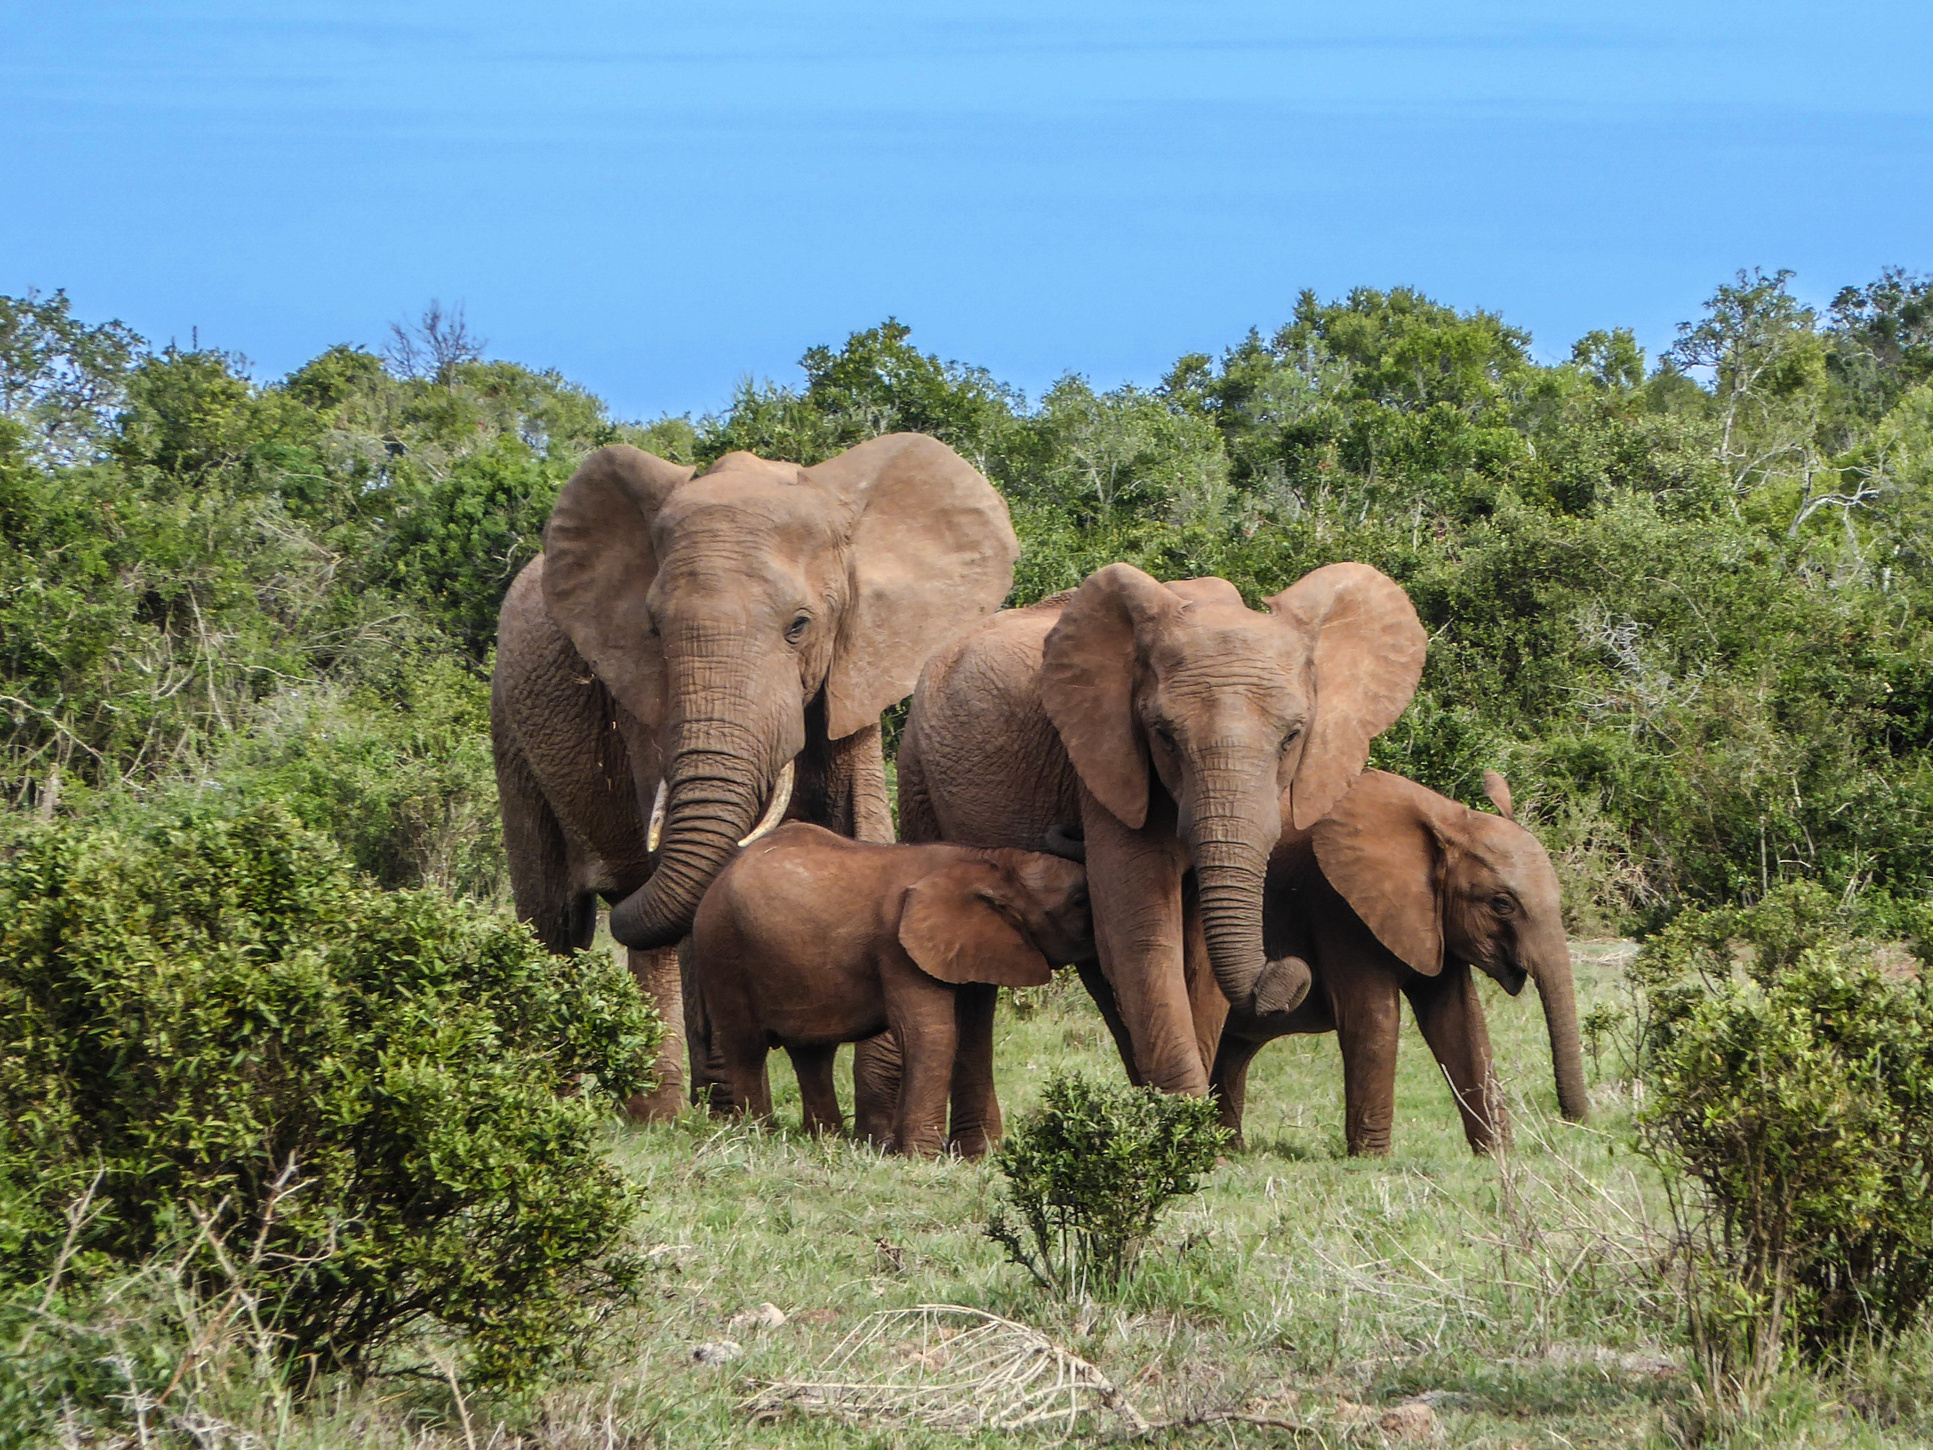 Elephant Family in South Africa